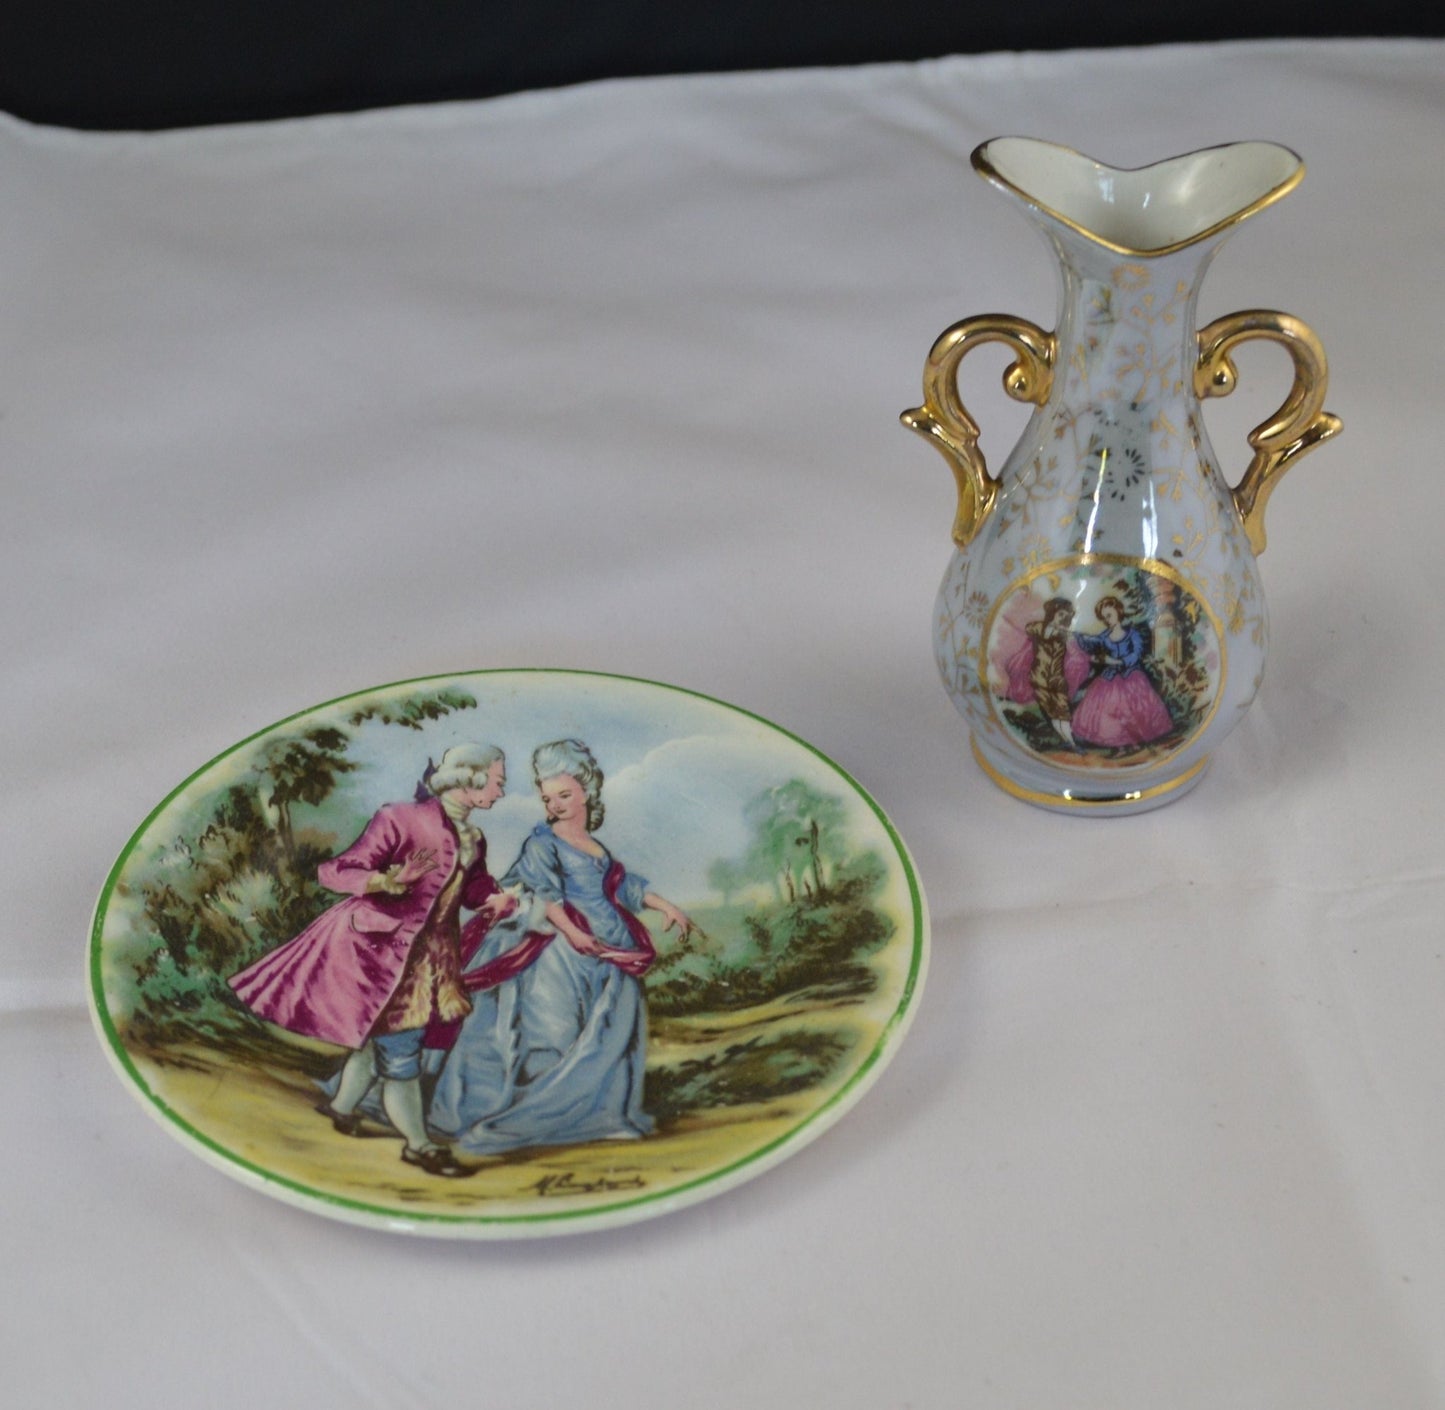 VINTAGE STAFFS TEASET CO LTD TUNSTALL SMALL PLATE AND SMALL FOREIGN VASE(PREVIOUSLY OWNED) - TMD167207